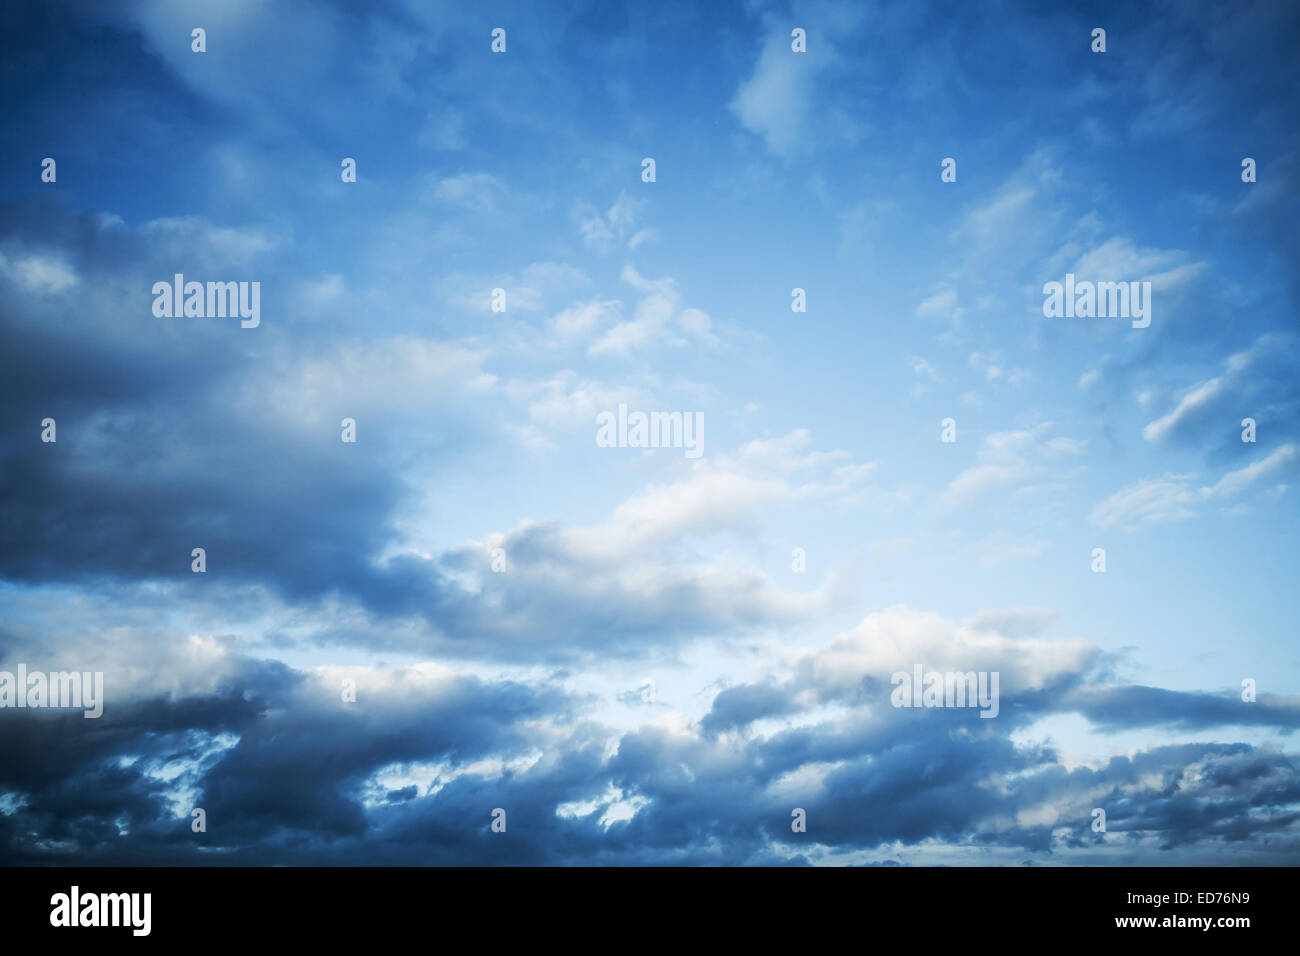 Dark blue sky with clouds, abstract nature background Stock Photo